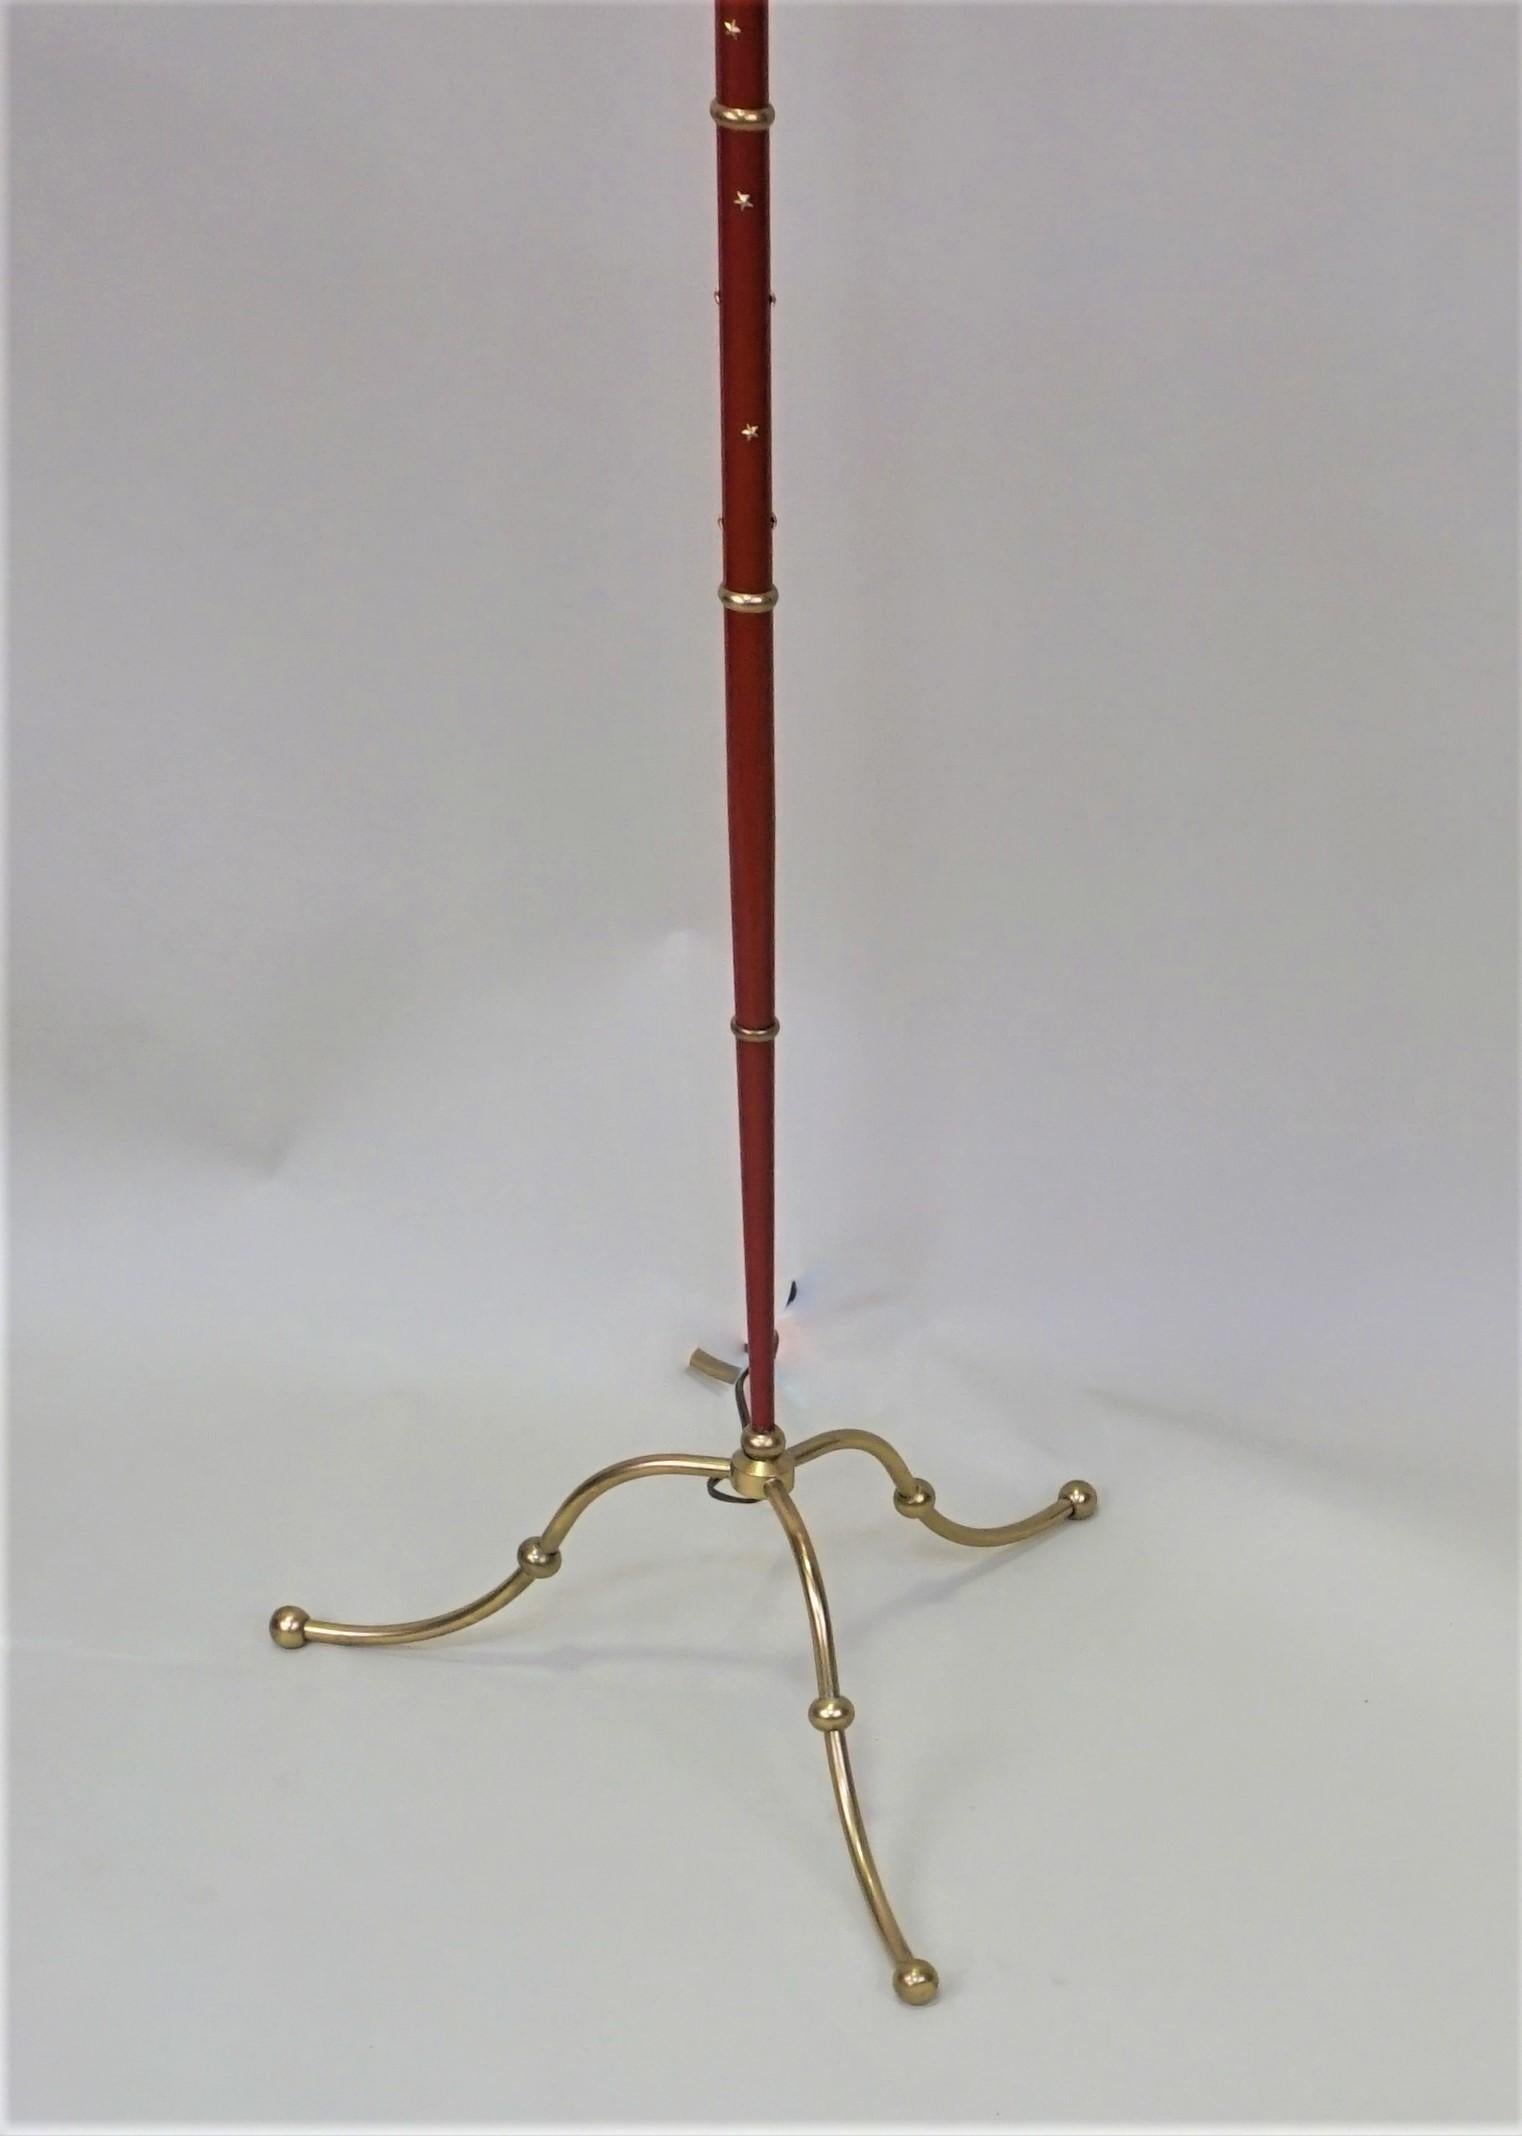 Rare bronze floor lamp with red lacquer column and bronze star.
Customized lampshade, double socket 100 watts max each.